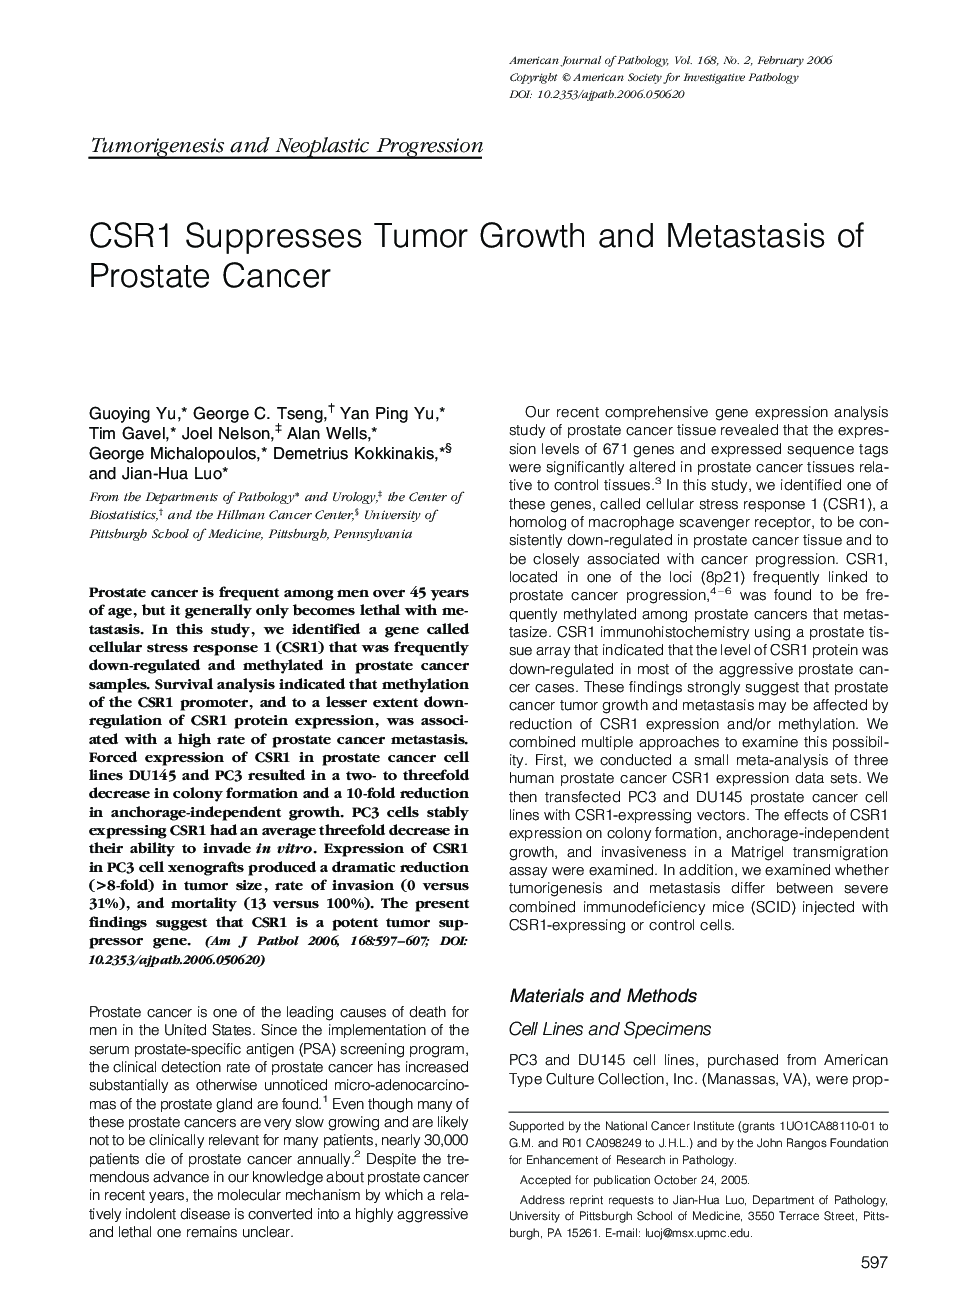 CSR1 Suppresses Tumor Growth and Metastasis of Prostate Cancer